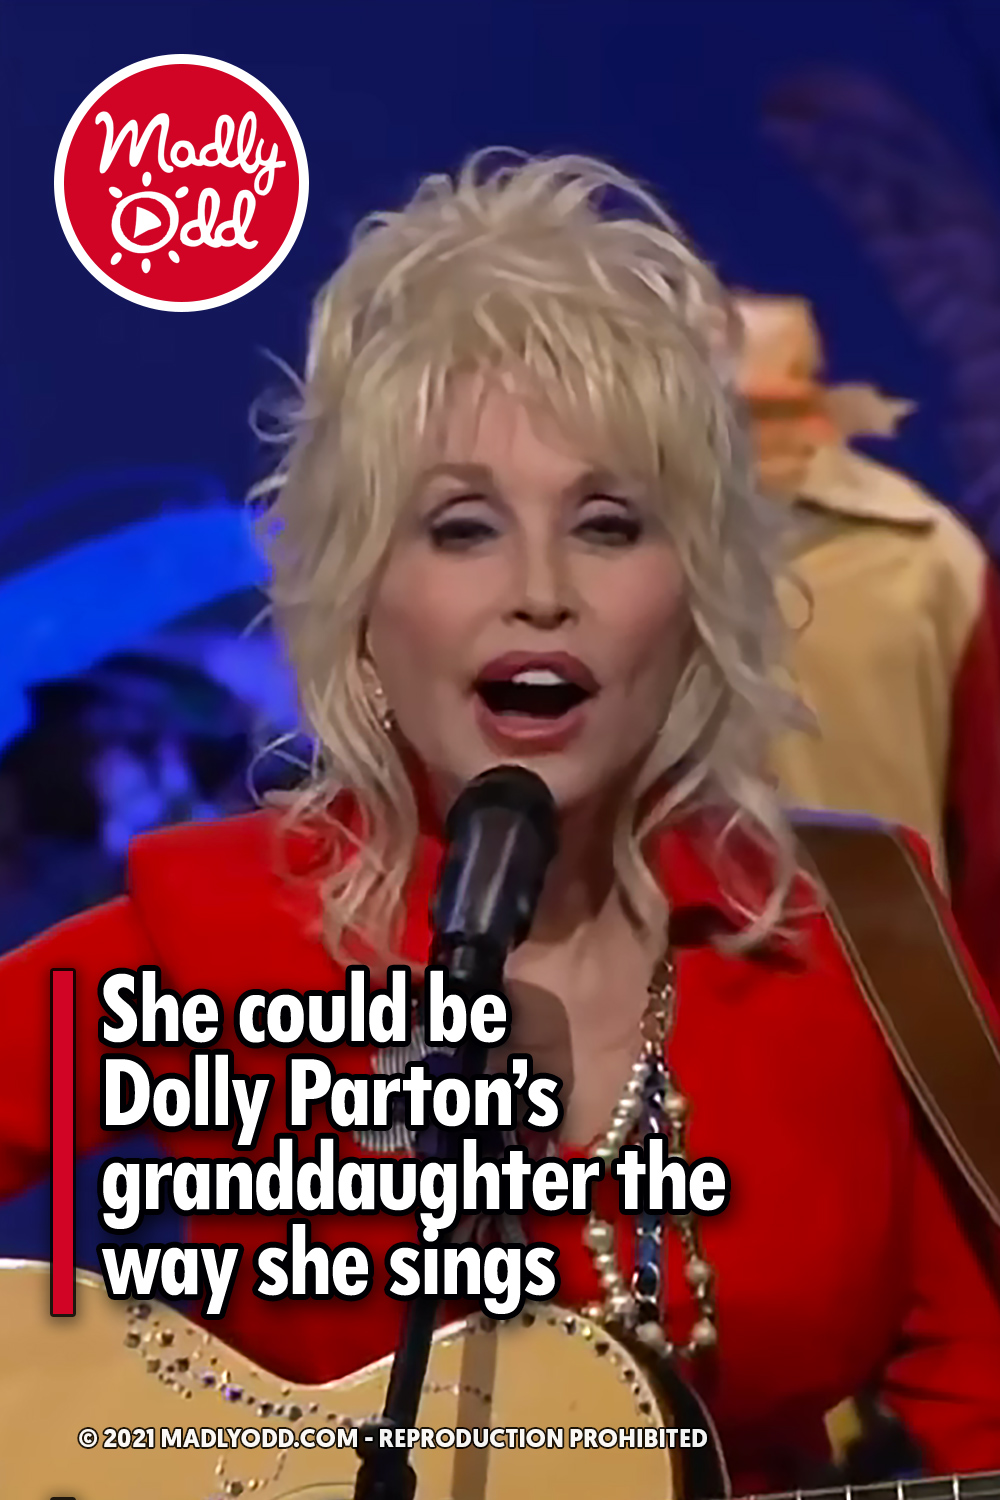 She could be Dolly Parton’s granddaughter the way she sings